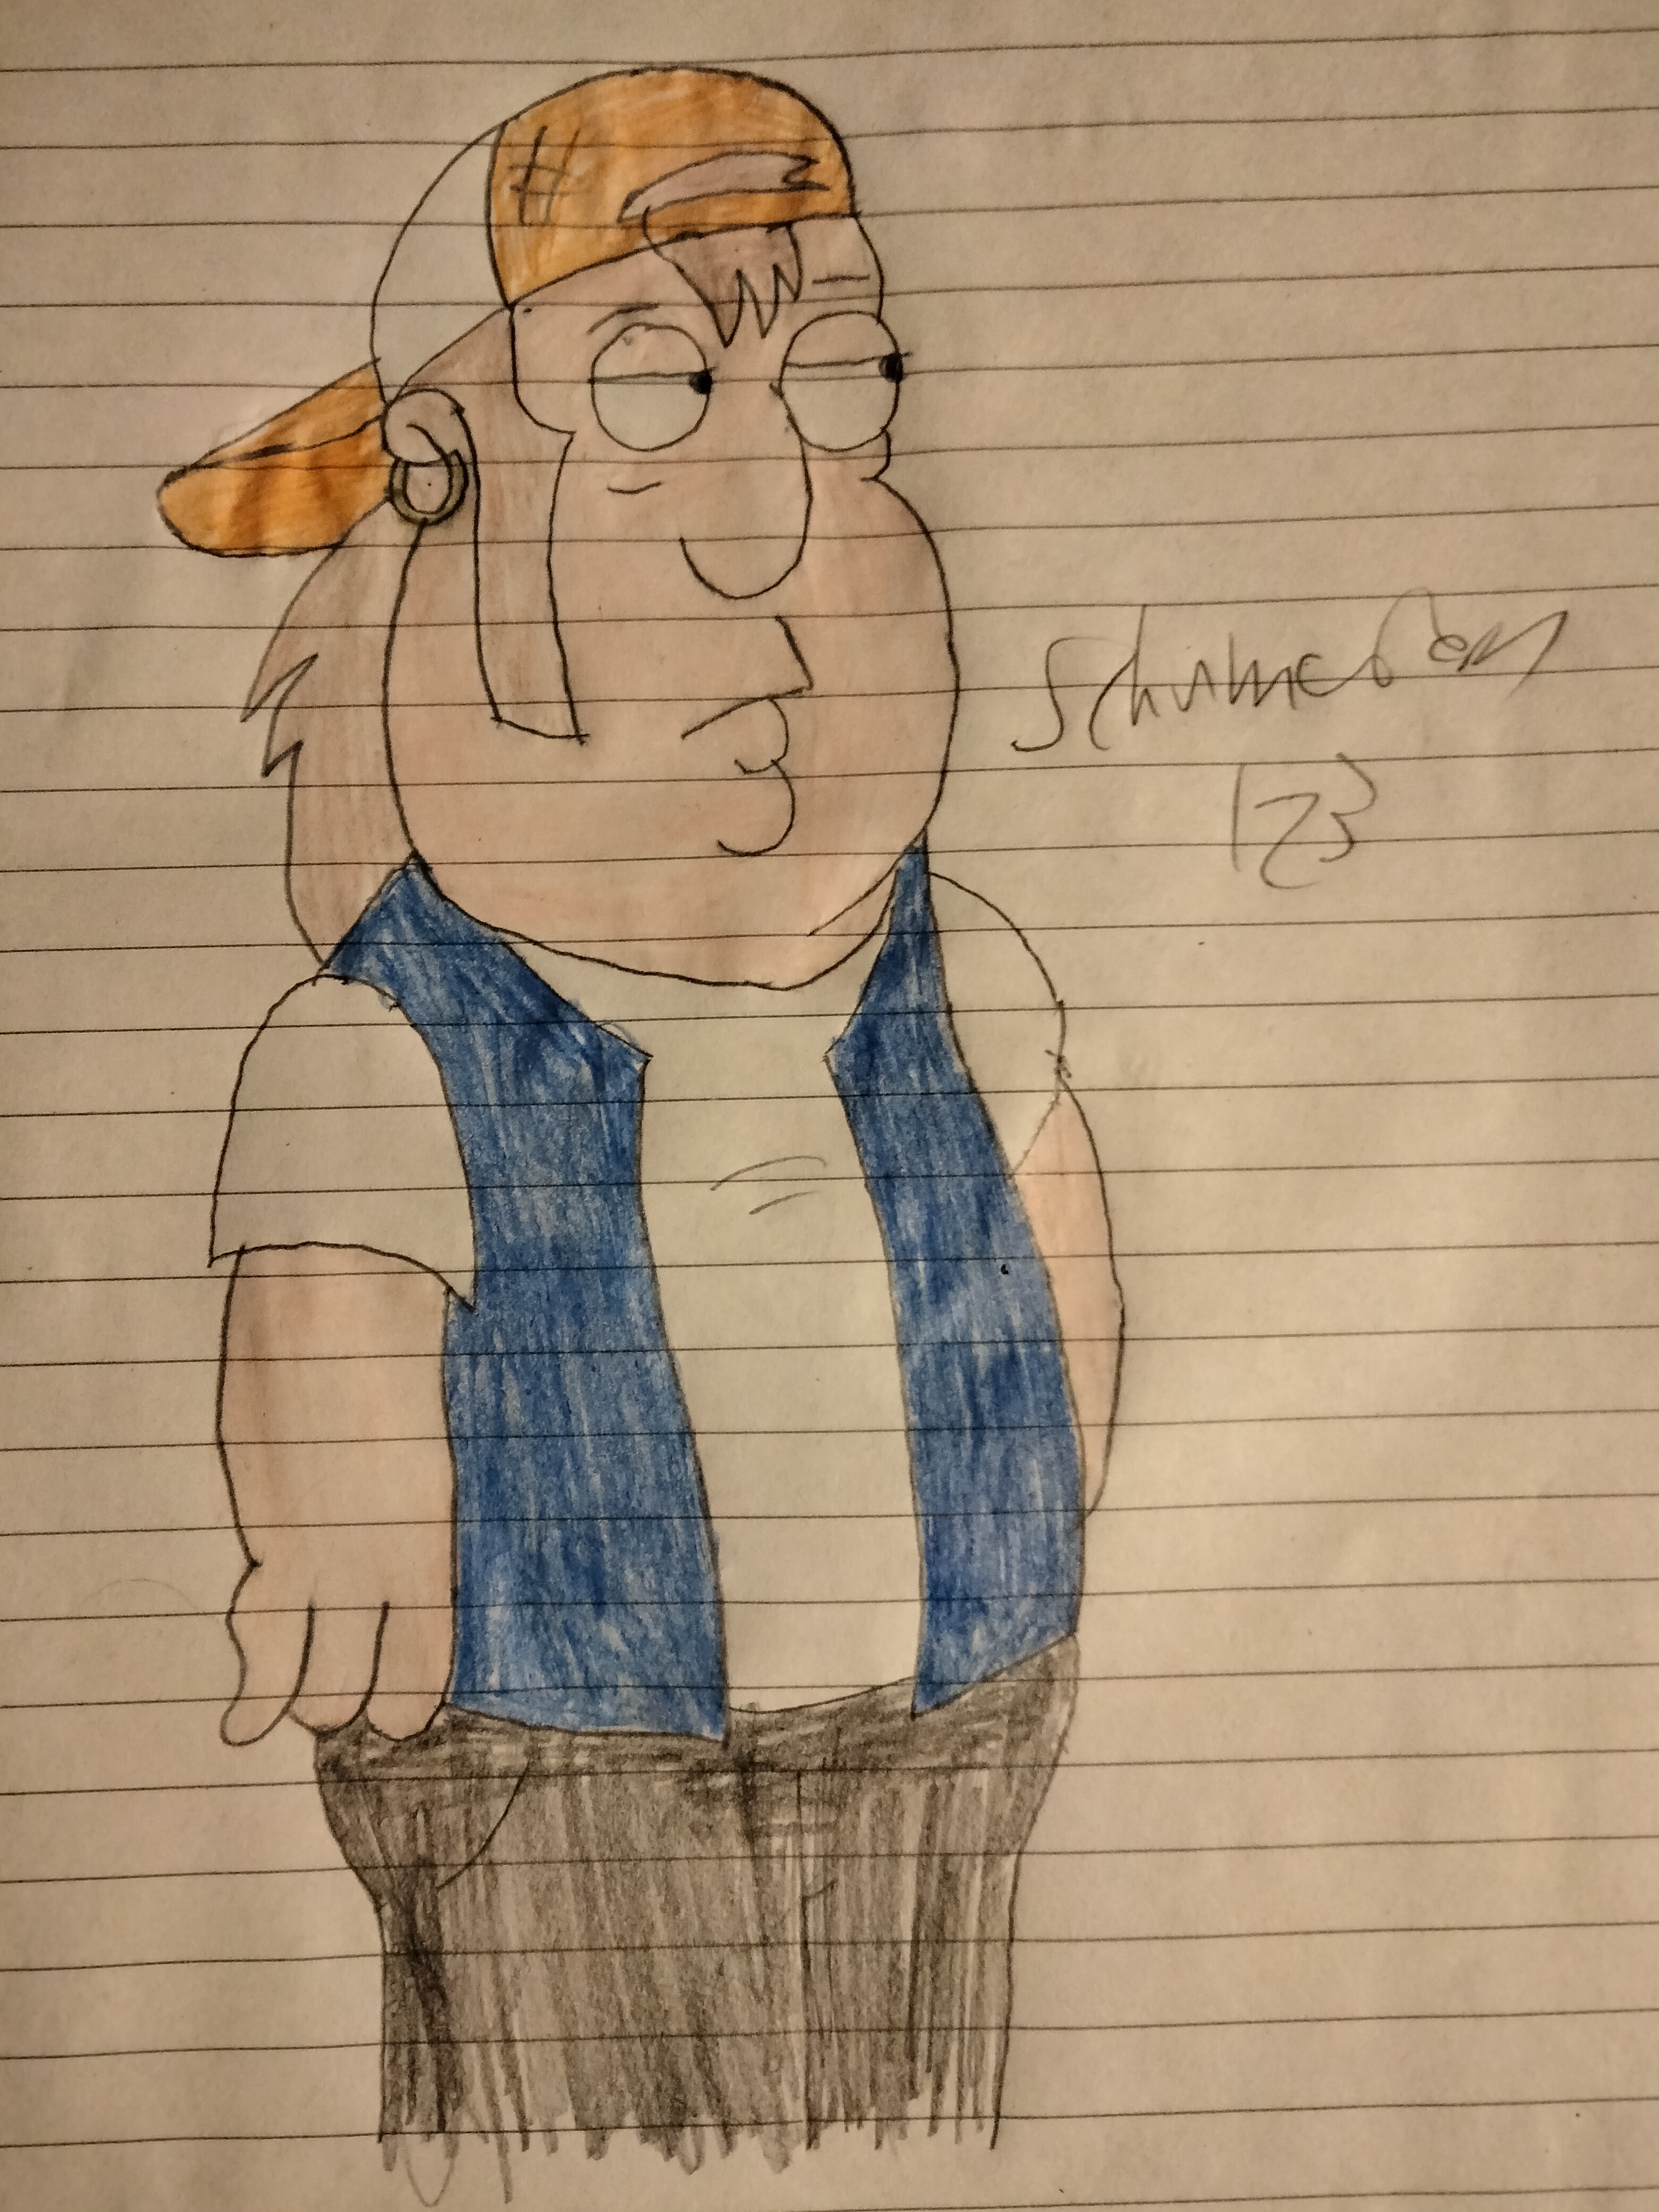 Peter Griffin as Niko Bellic by Benny49 on DeviantArt